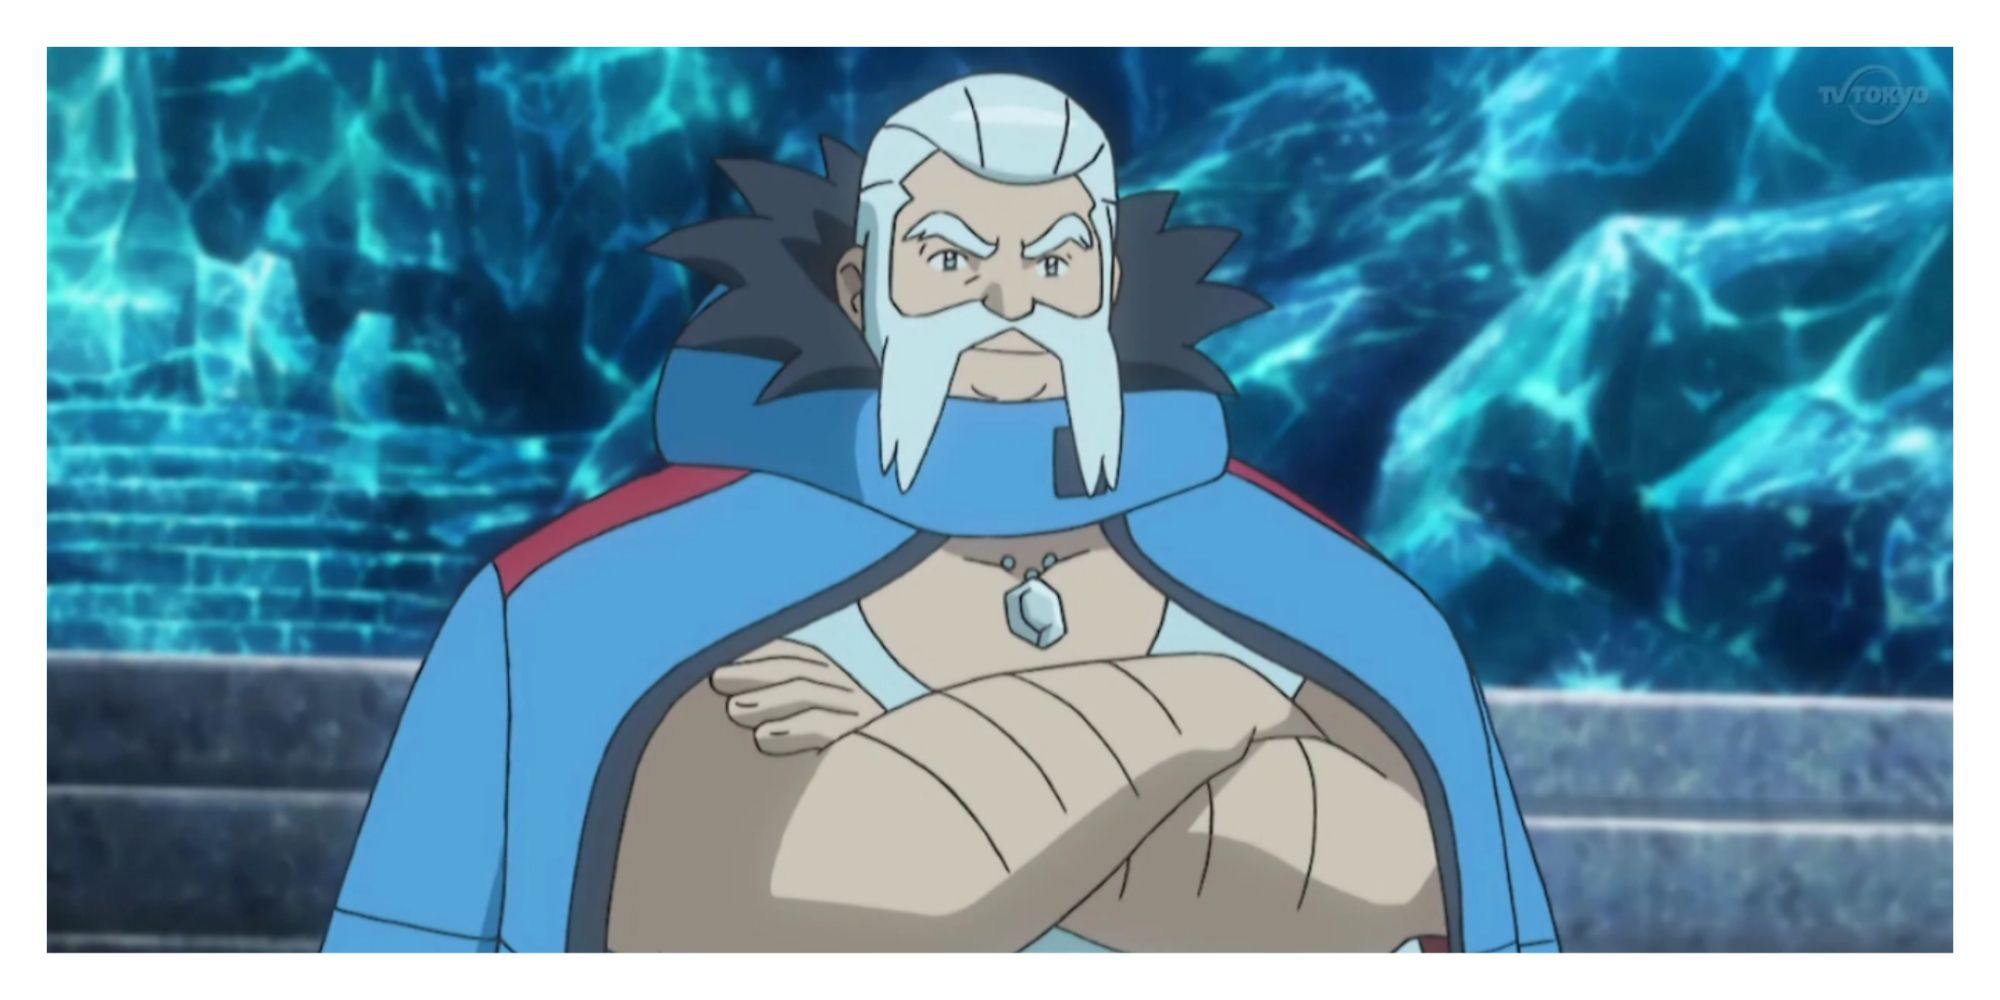 Wulfric, the ice-type and final gym leader of Kalos